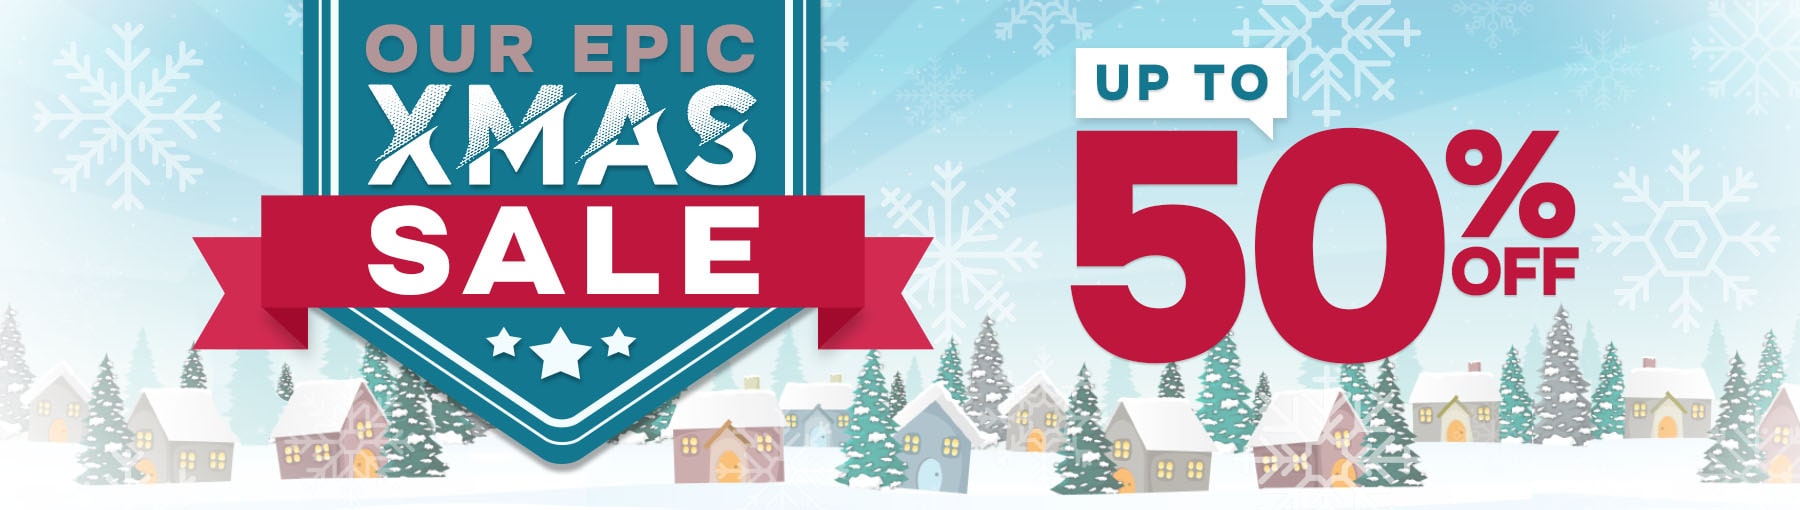 Badminton Christmas Sale up to 50% Off